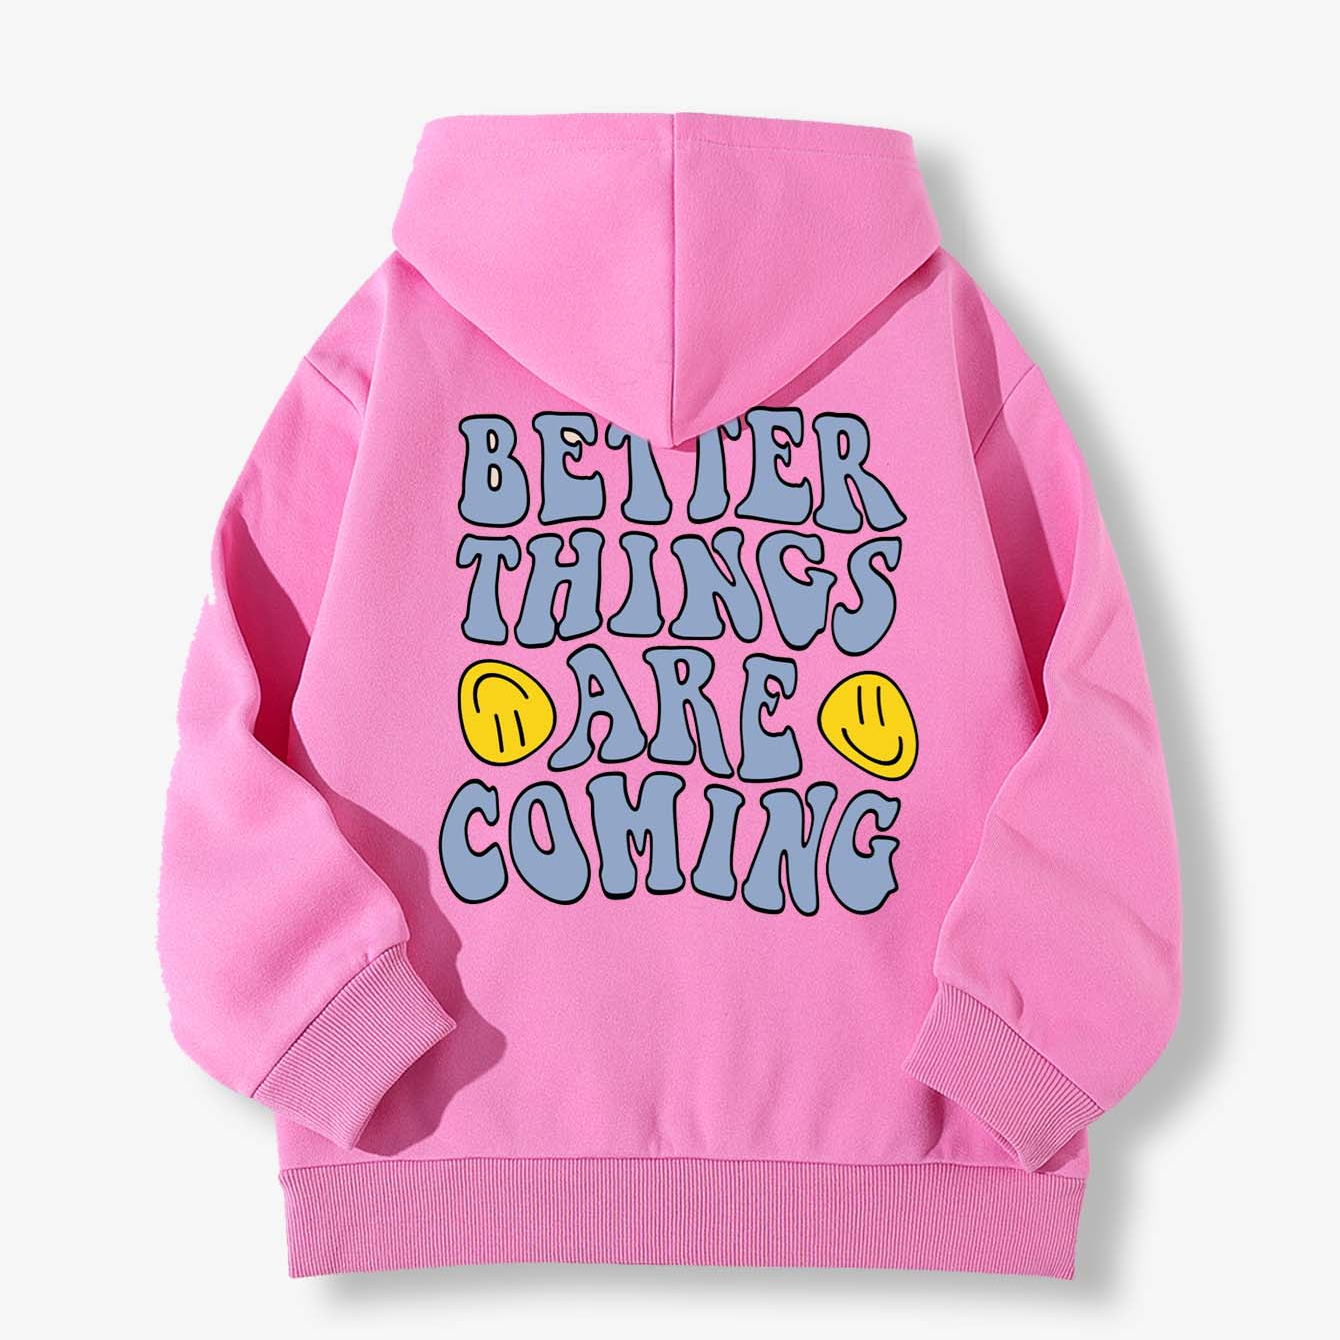 

Better Things Are Coming Letter Print Boys Casual Pullover Long Sleeve Hoodies, Boys Sweatshirt For Spring Fall, Kids Hoodie Tops Outdoor